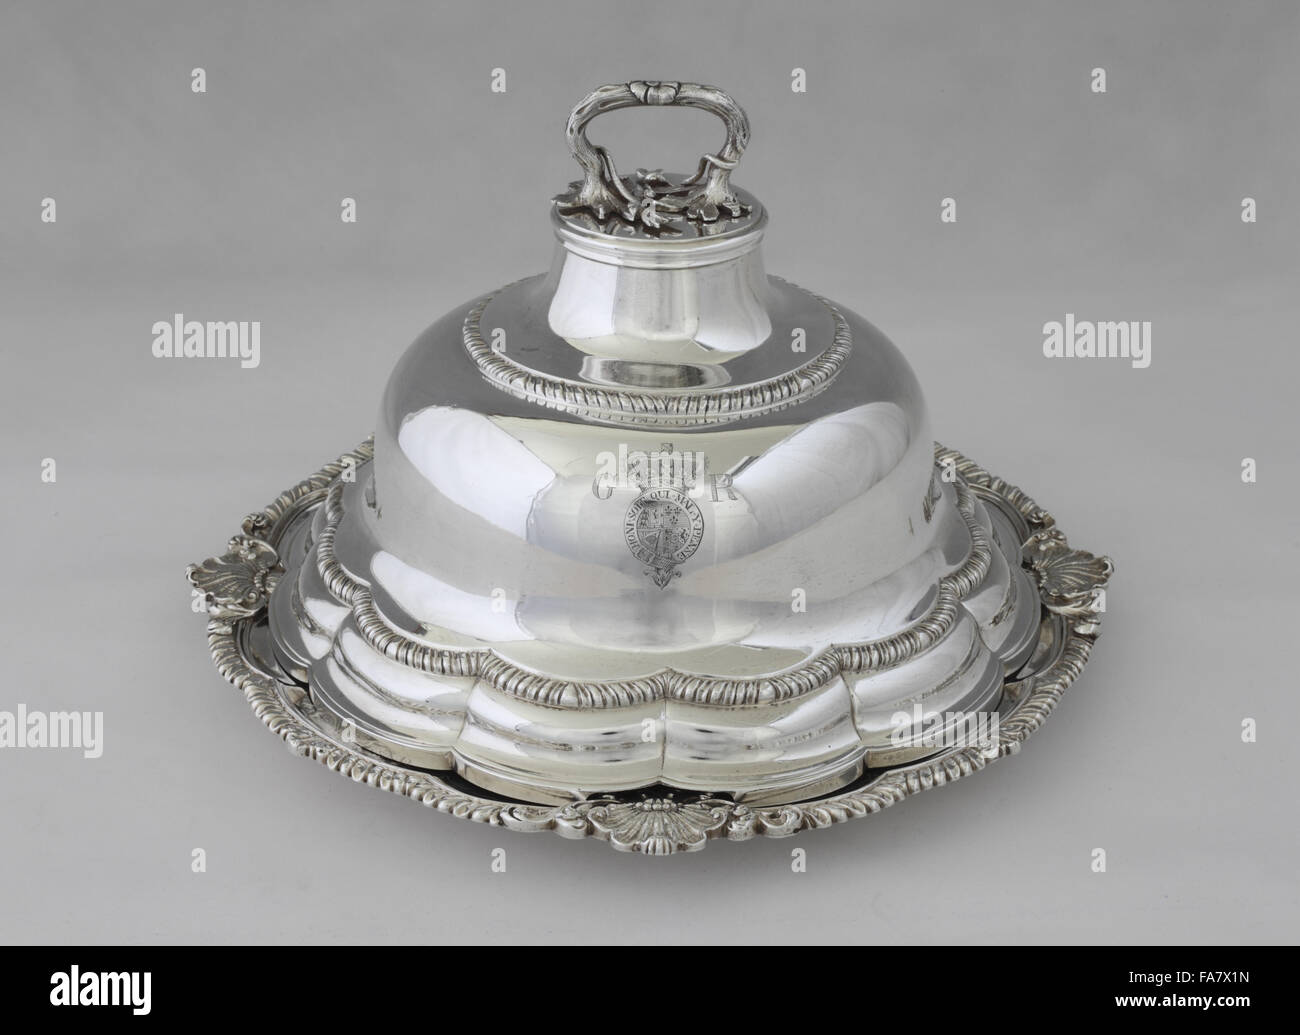 Second course dish and cover, part of the silver collection at Ickworth, Suffolk. National Trust inventory number: 852121 Stock Photo